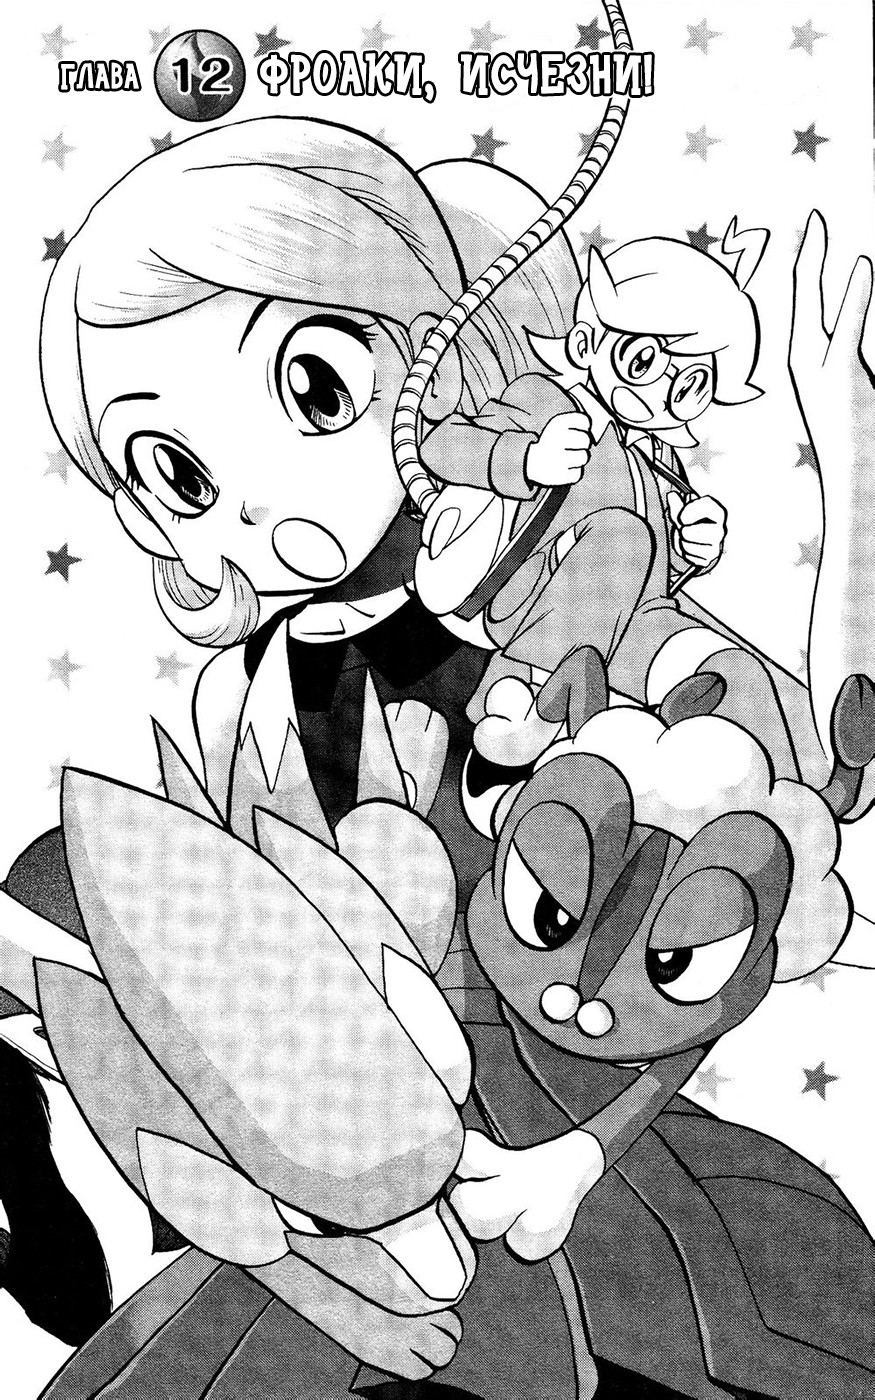 Pocket Monsters Special XY 2 - 12 Фроаки, исчезни!